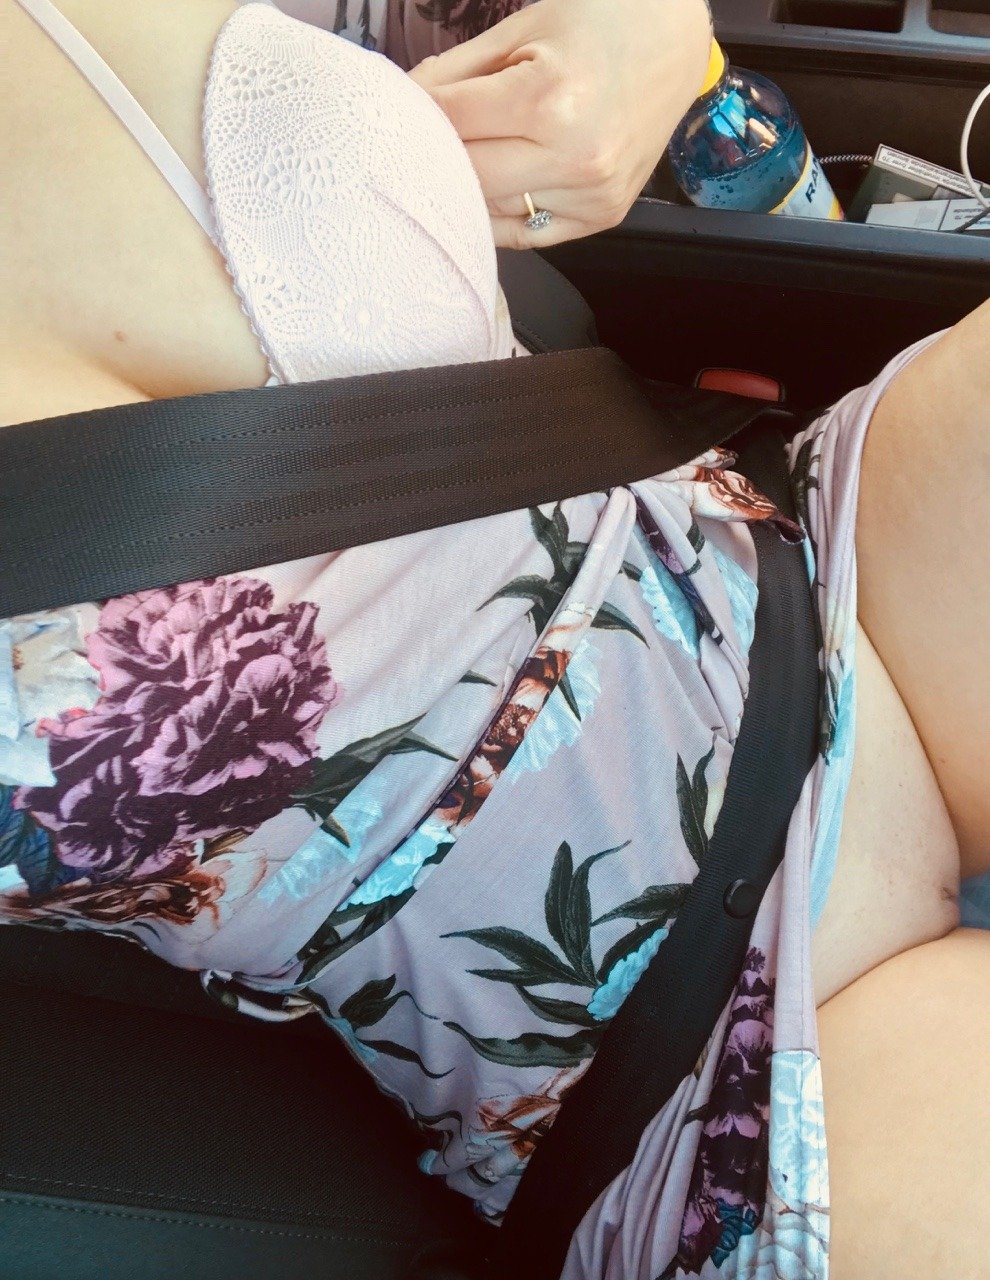 Photo by Cellulite & Pawg with the username @Cellulite,  January 29, 2019 at 2:21 AM and the text says 'Sweet view! #upskirt #pussy #car #hot'